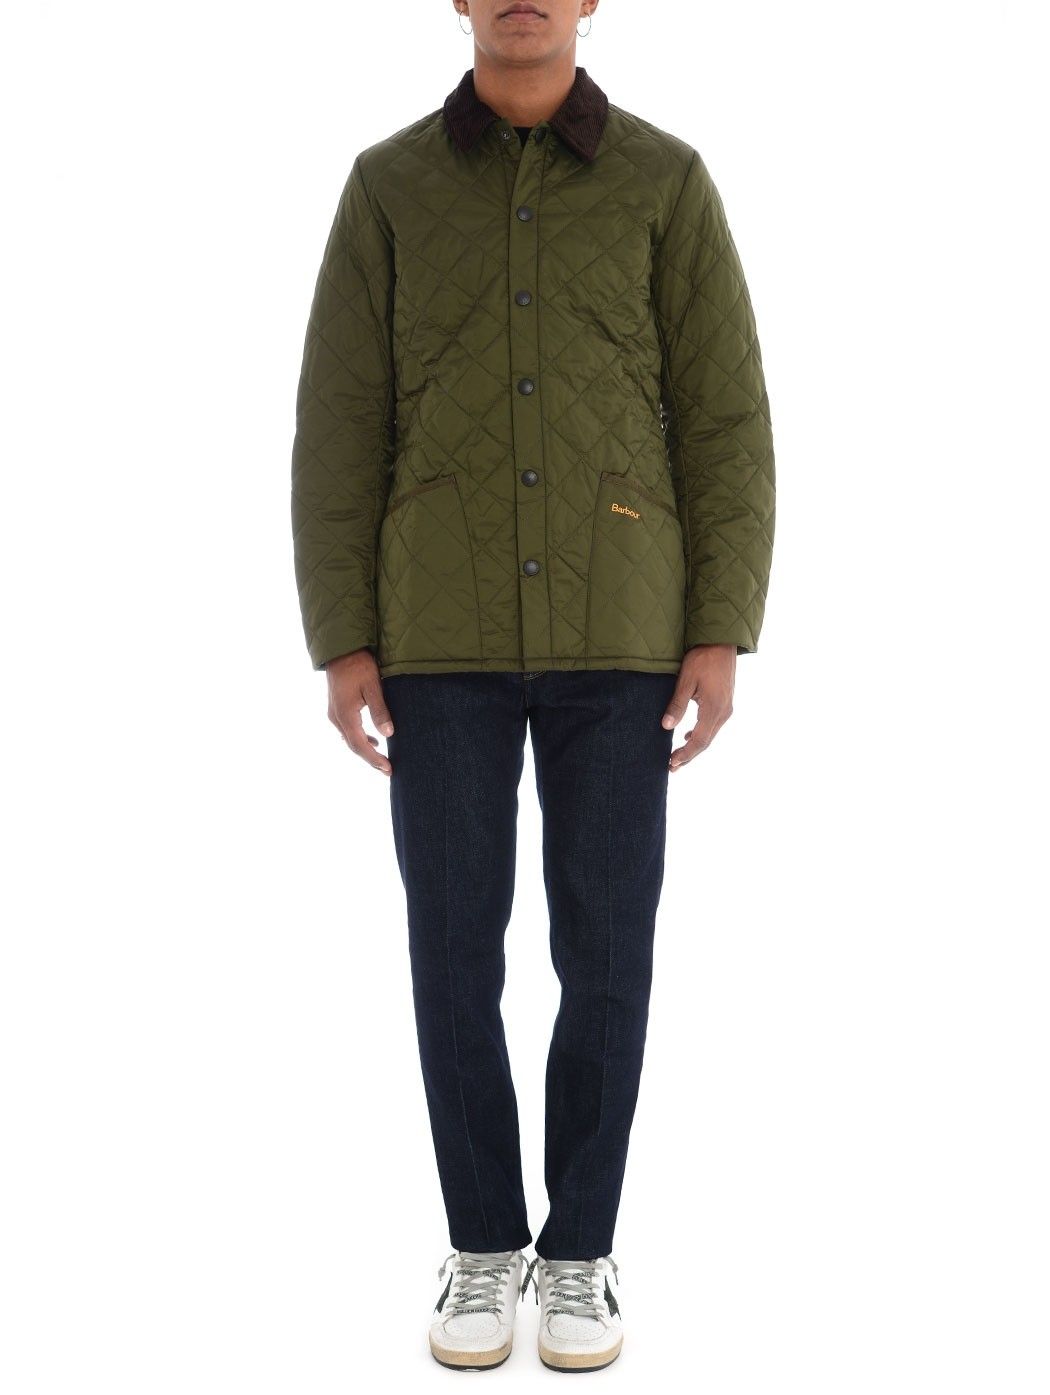  MAN DOWN JACKET,MONCLER DOWN JACKET,HERNO DOWN JACKET,WOOLRICH DOWN JACKET  BARBOUR MQU0240